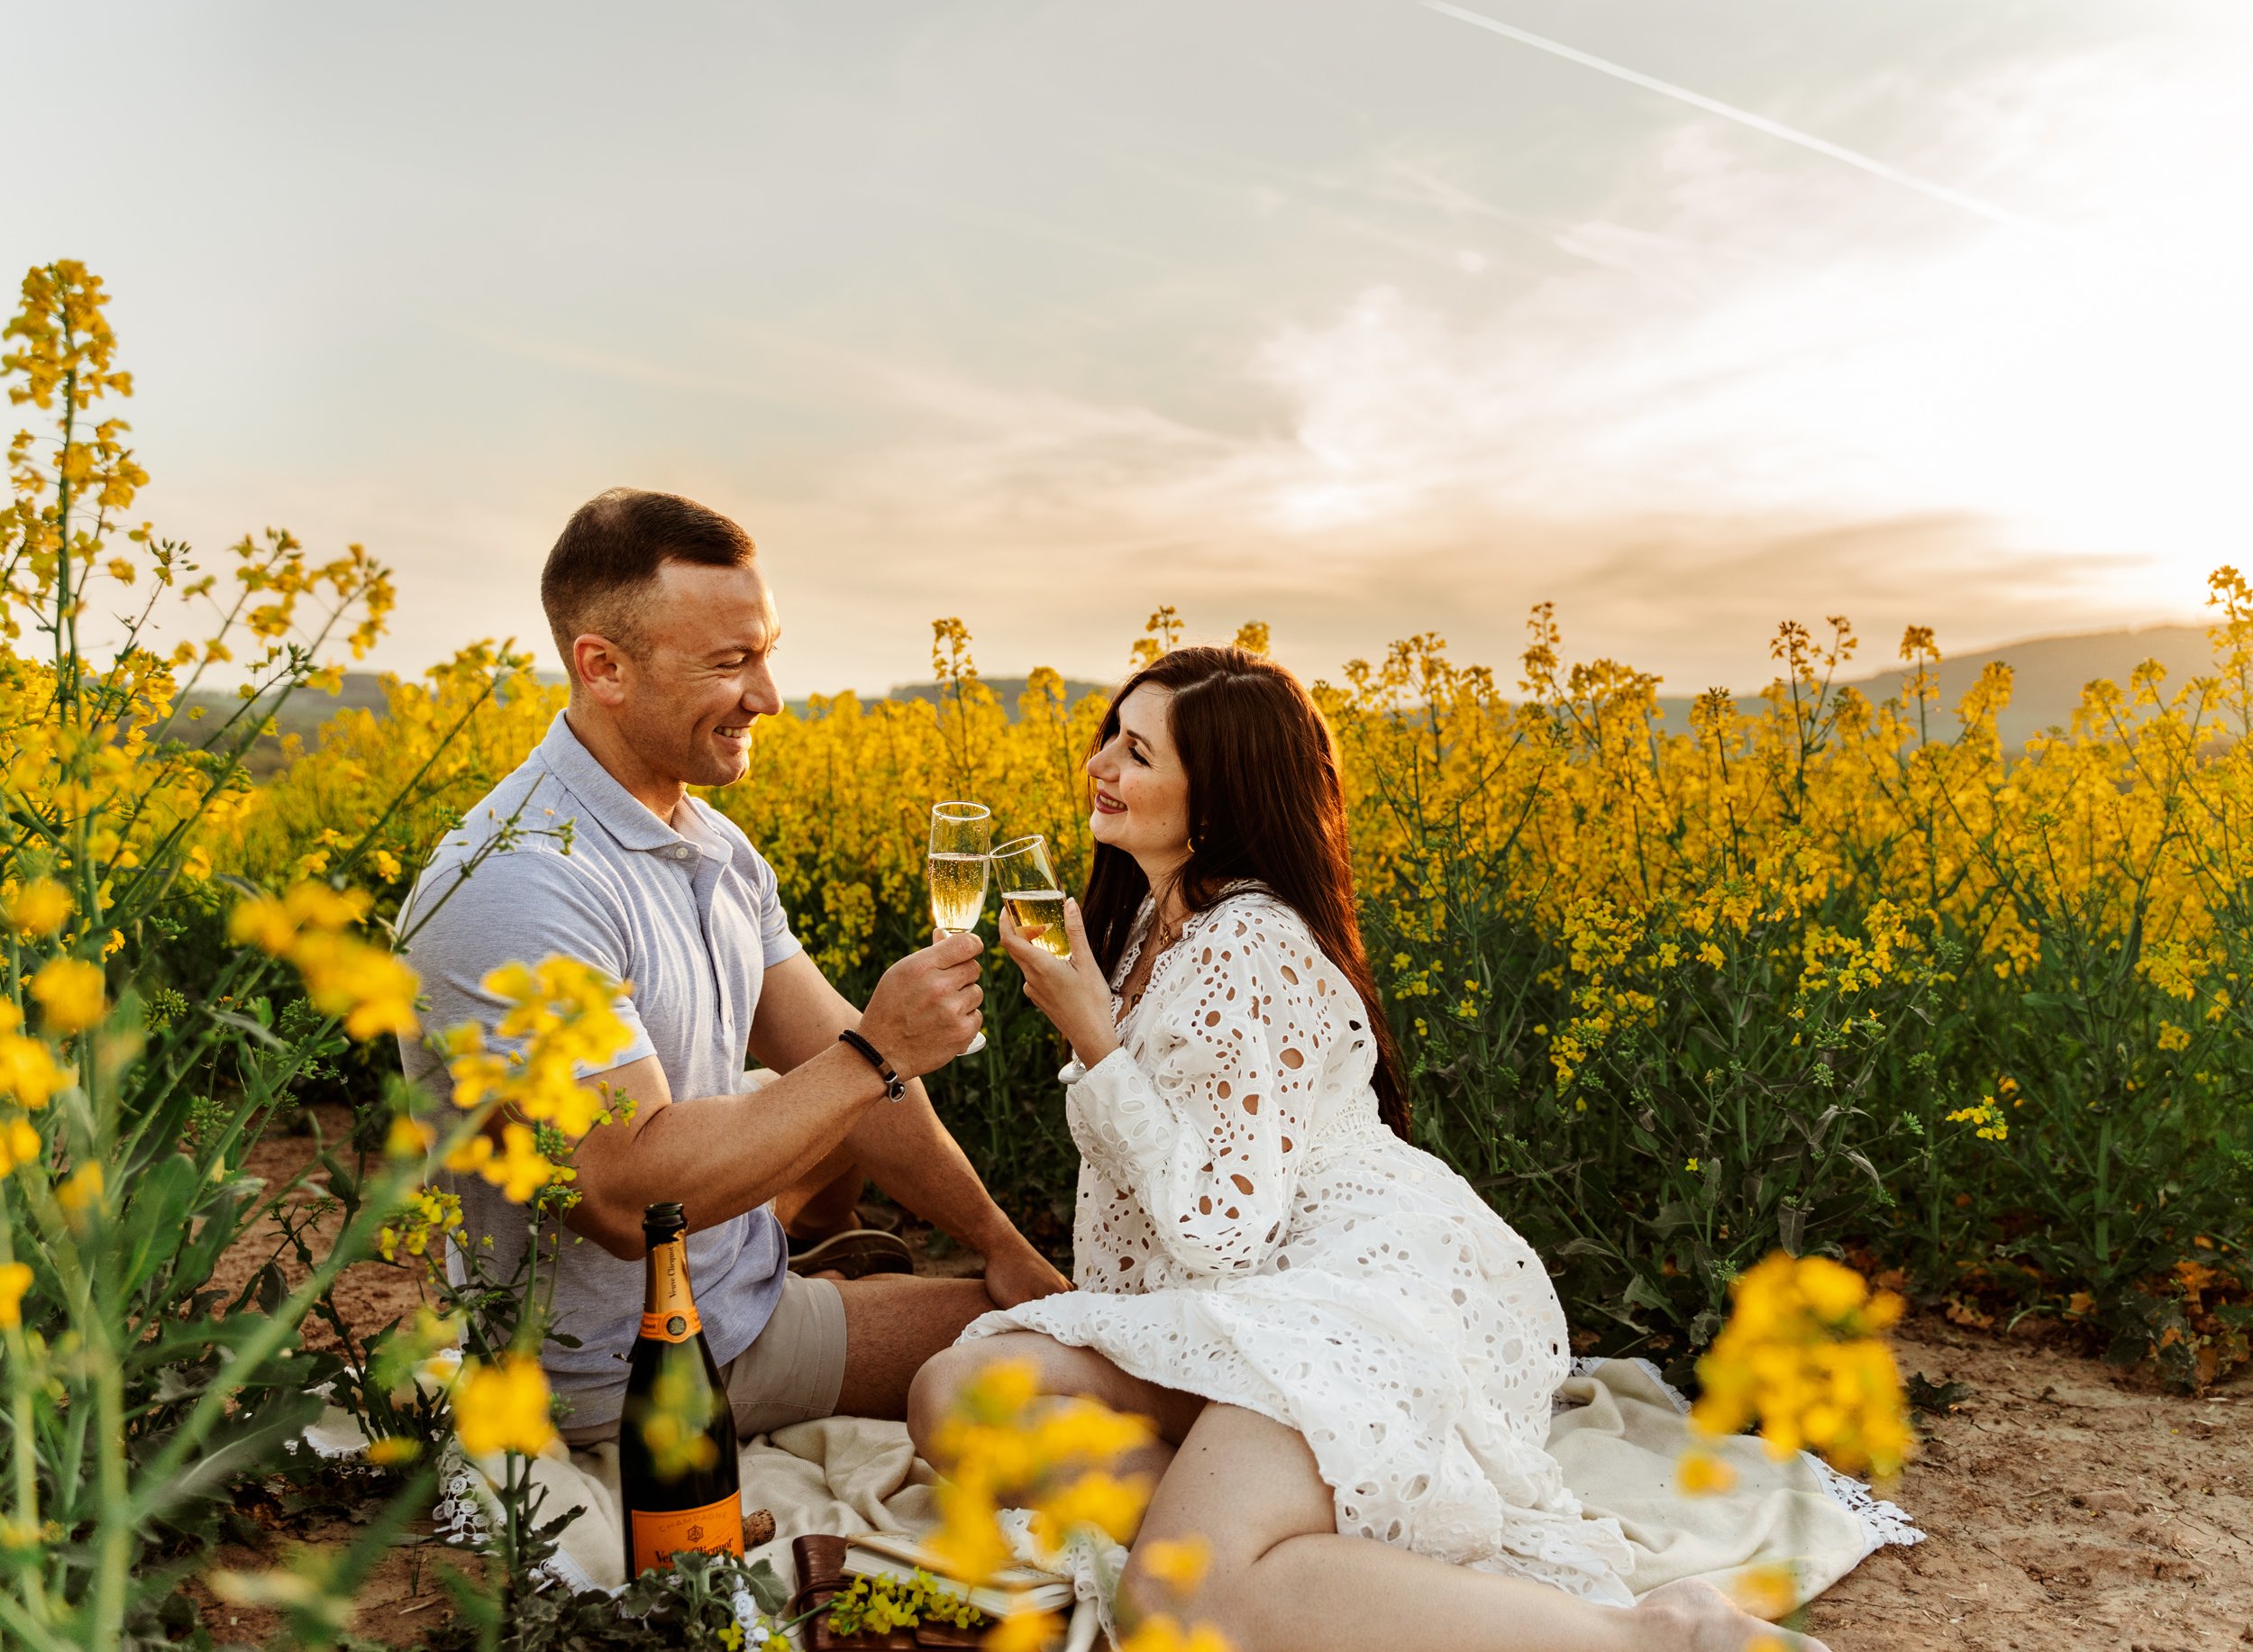 emotive-engagement-photo-session-in-yellow-flower-fields-in-ramstein-germany-by-sarah-havens (12).jpg